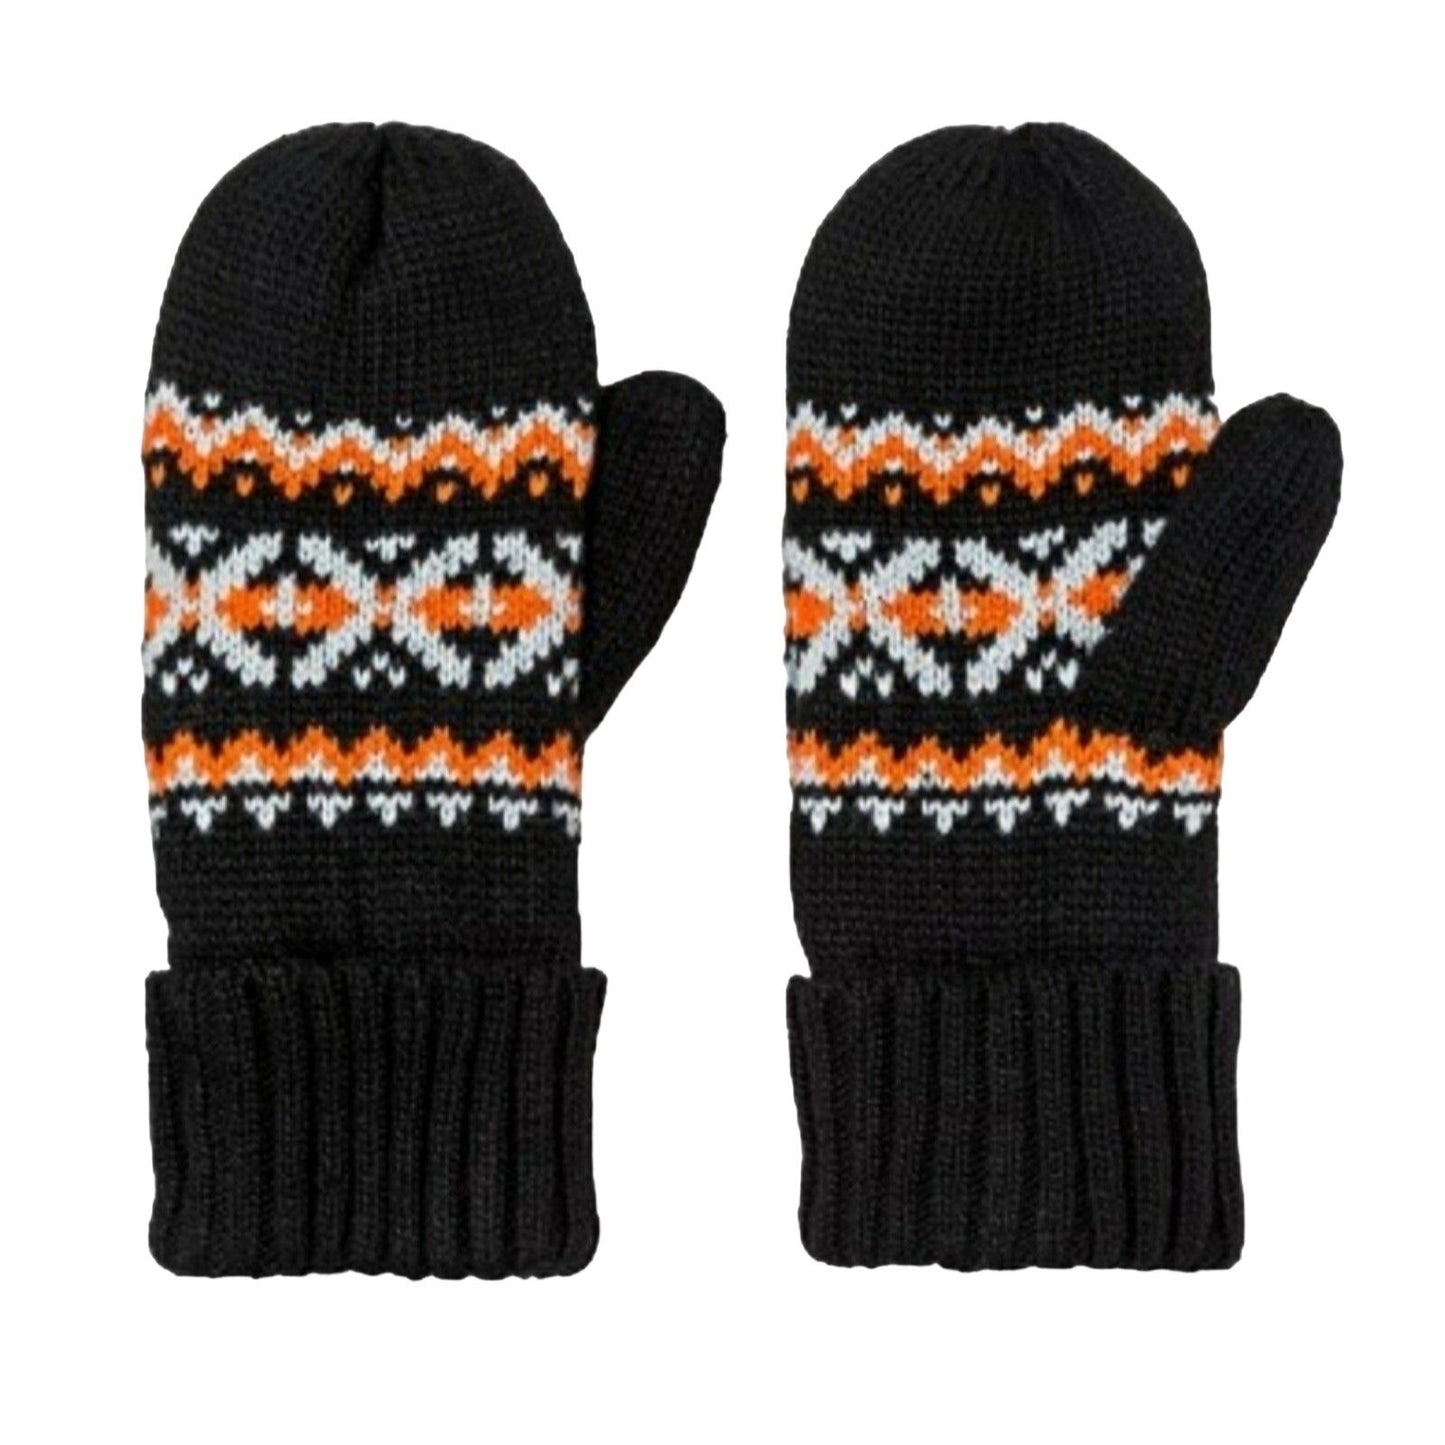 CAT & JACK Girls knit Mittens Double-layer Winter gloves Fair Isle